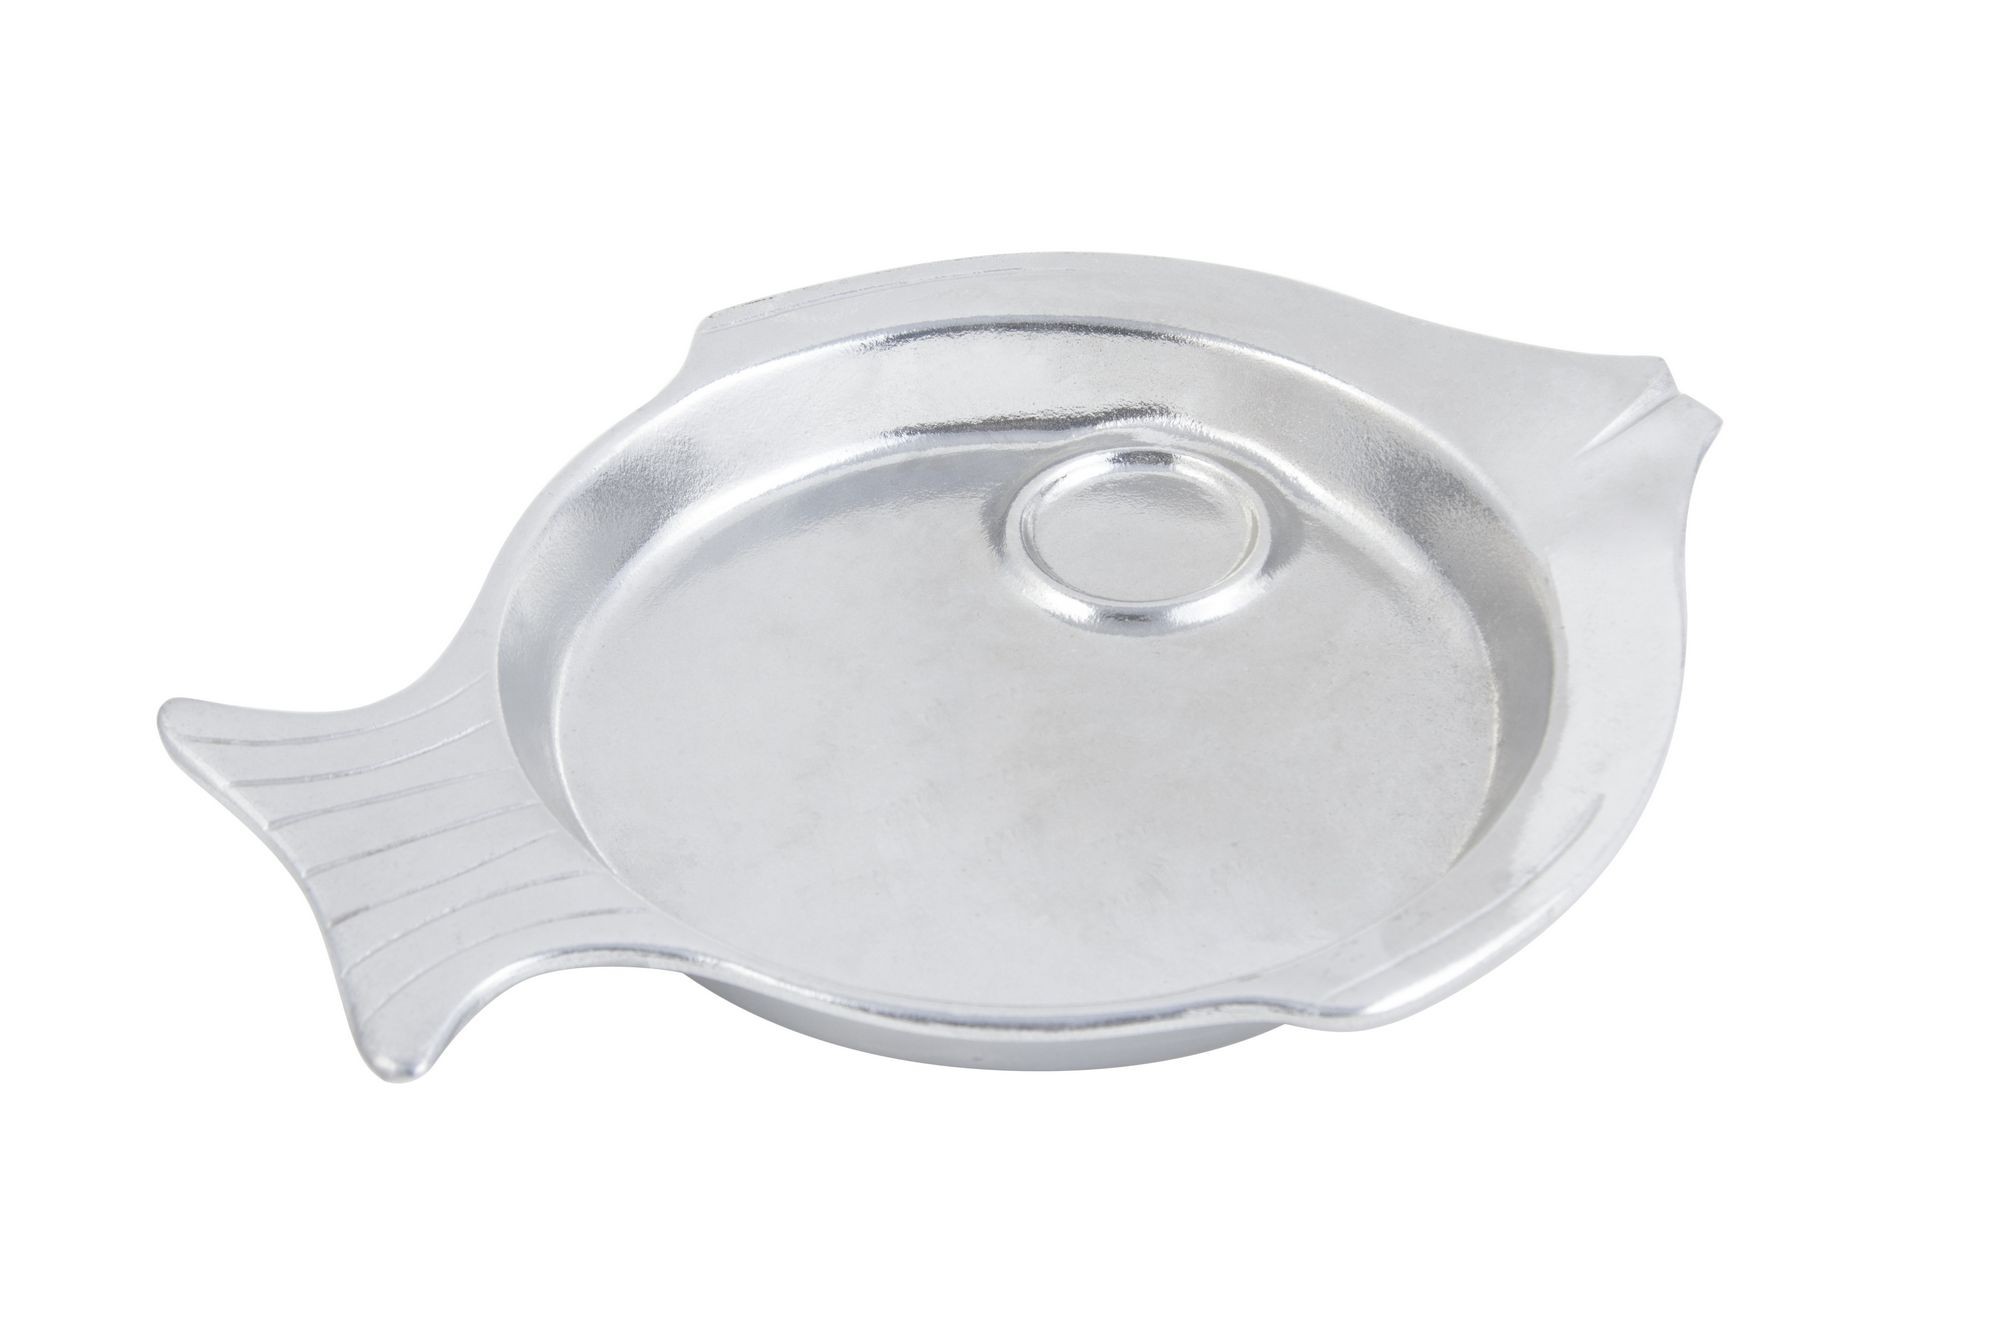 Bon Chef 5039P Round Fish Platter with Sauce Holder, Pewter Glo 15 1/4" Dia., Set of 6